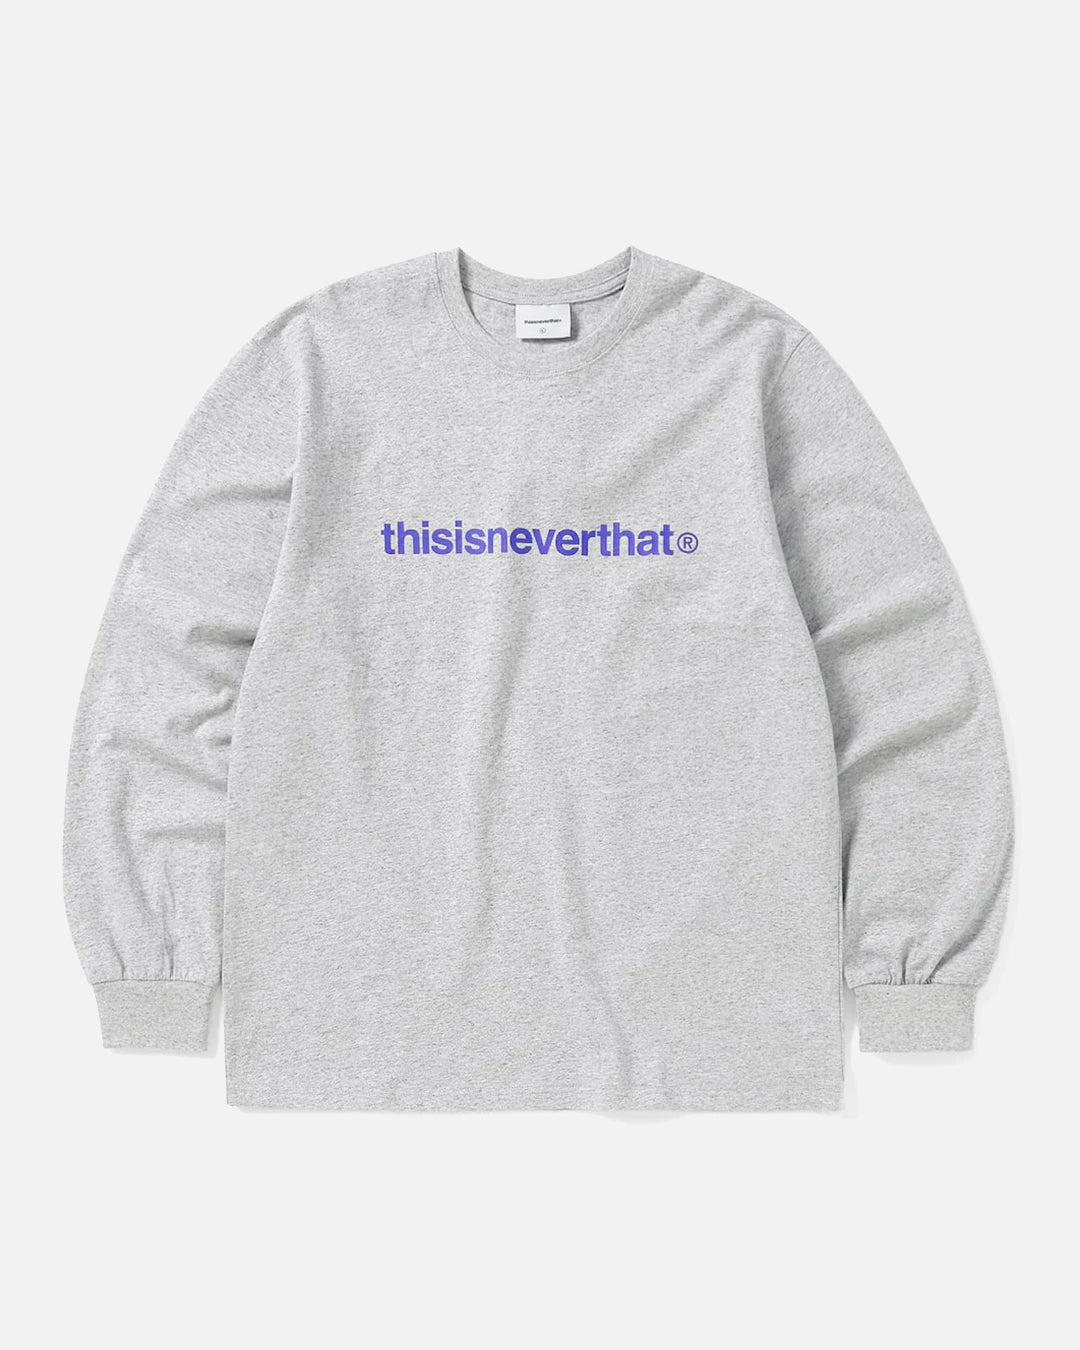 thisisneverthat T-Logo L/S Tee in | Blues Store Grey Heather